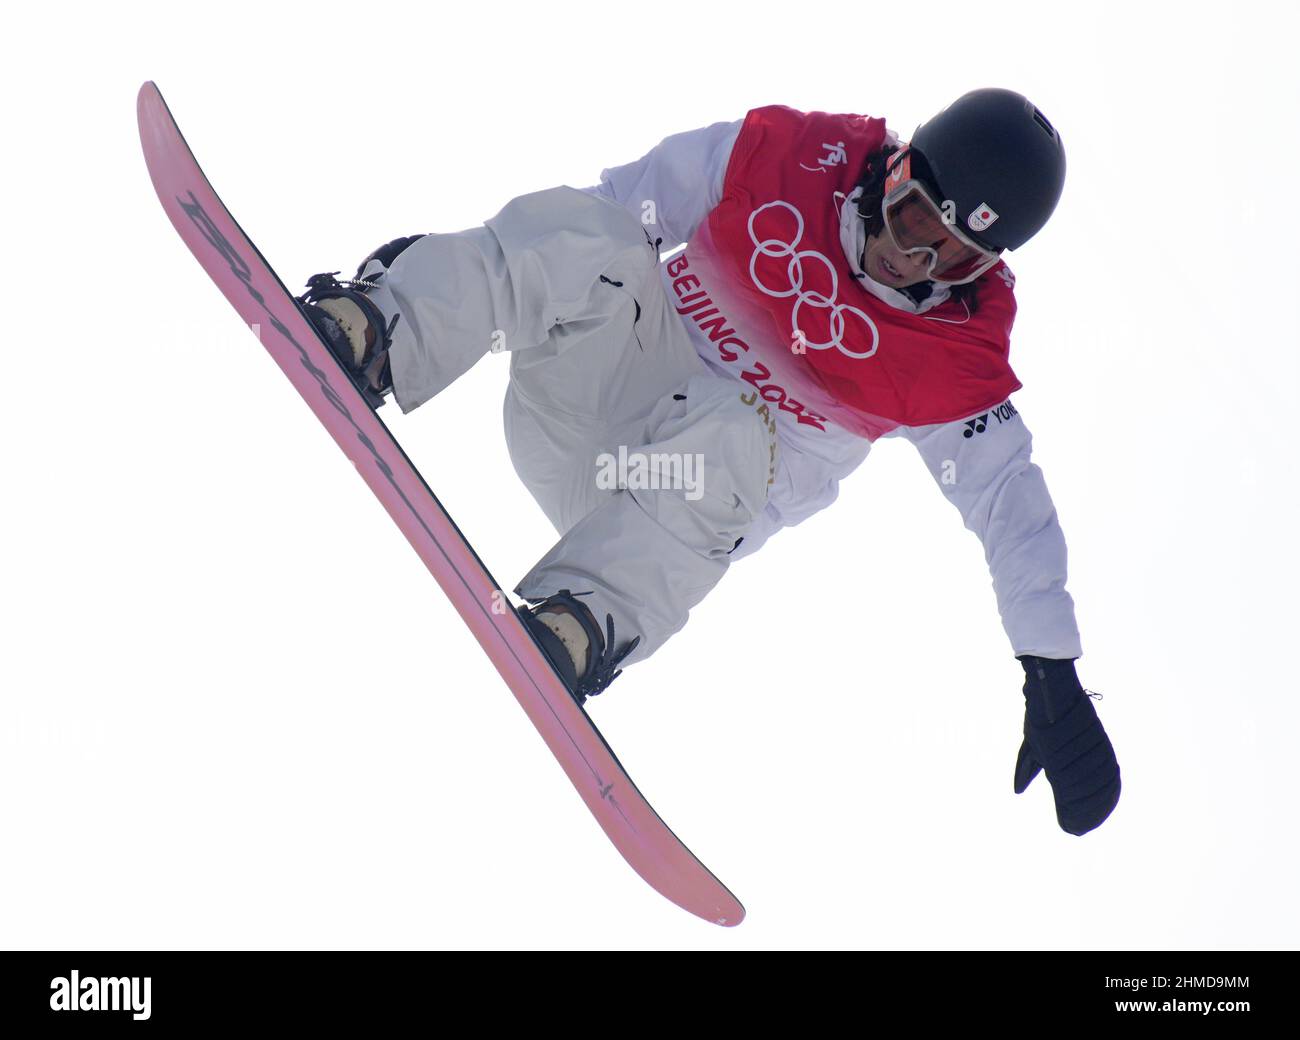 2022 winter olympics Cut Out Stock Images and Pictures